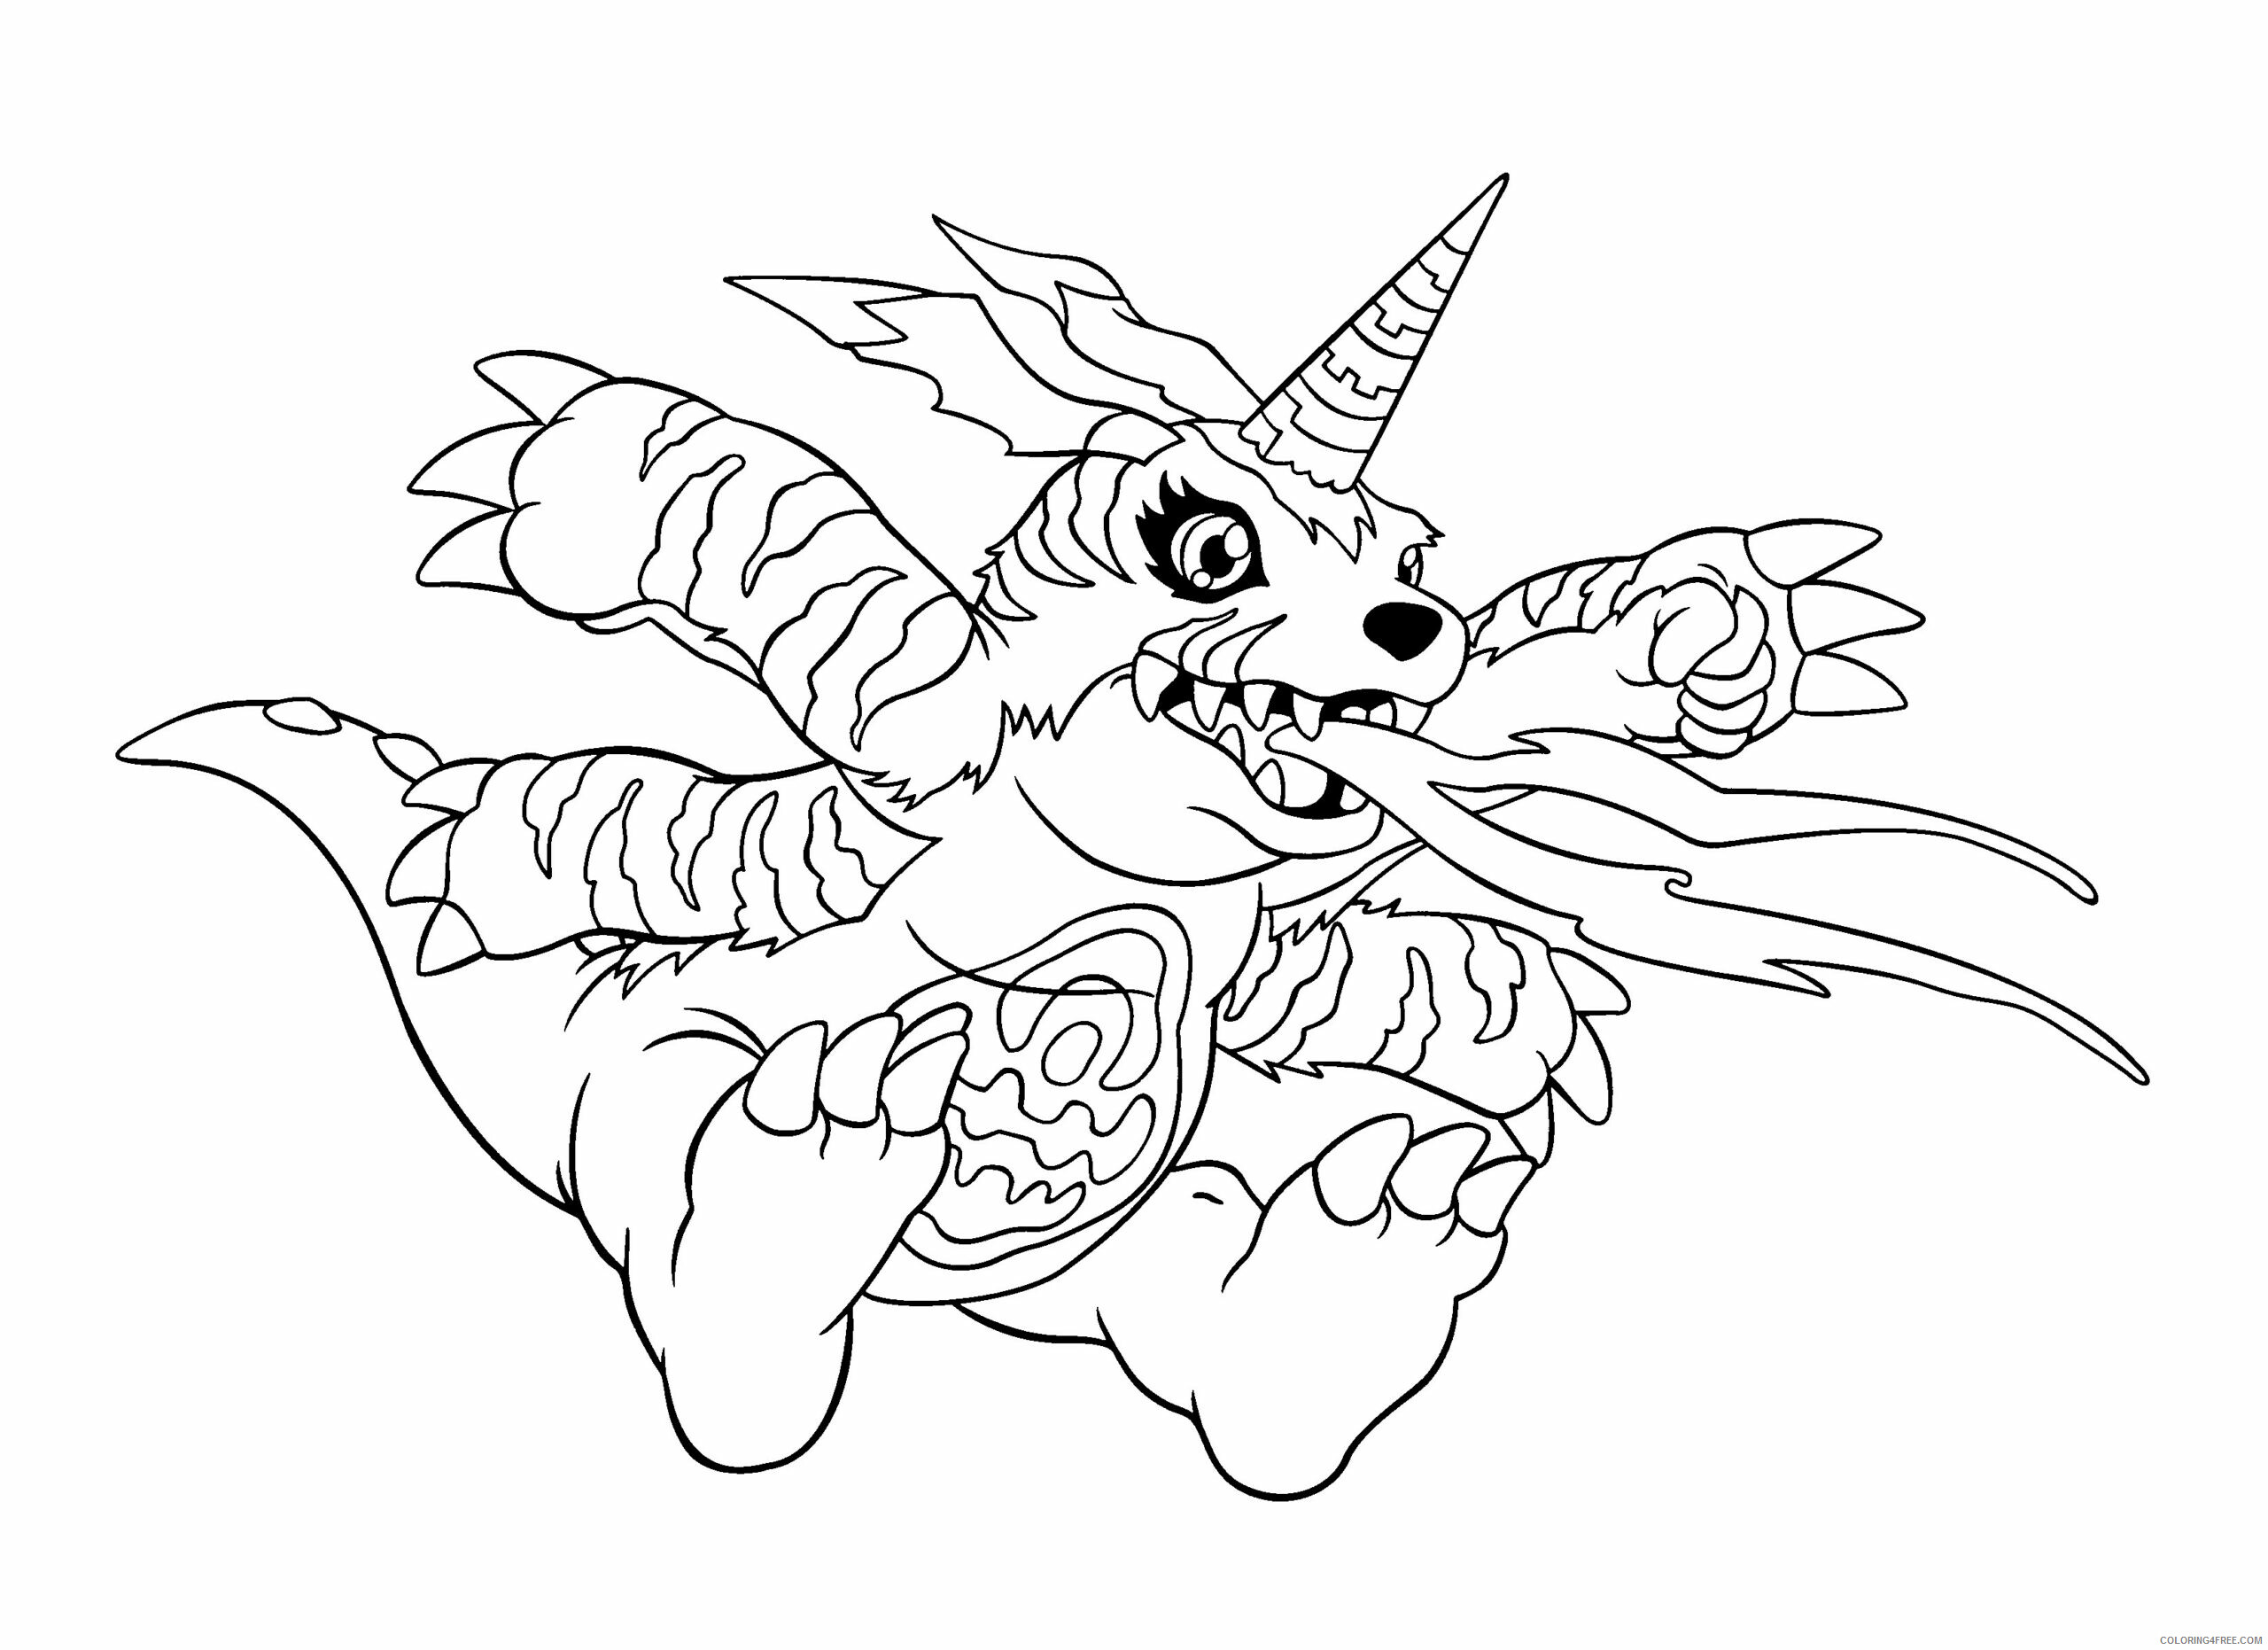 Digimon Printable Coloring Pages Anime digimon hLhS3 2021 0173 Coloring4free